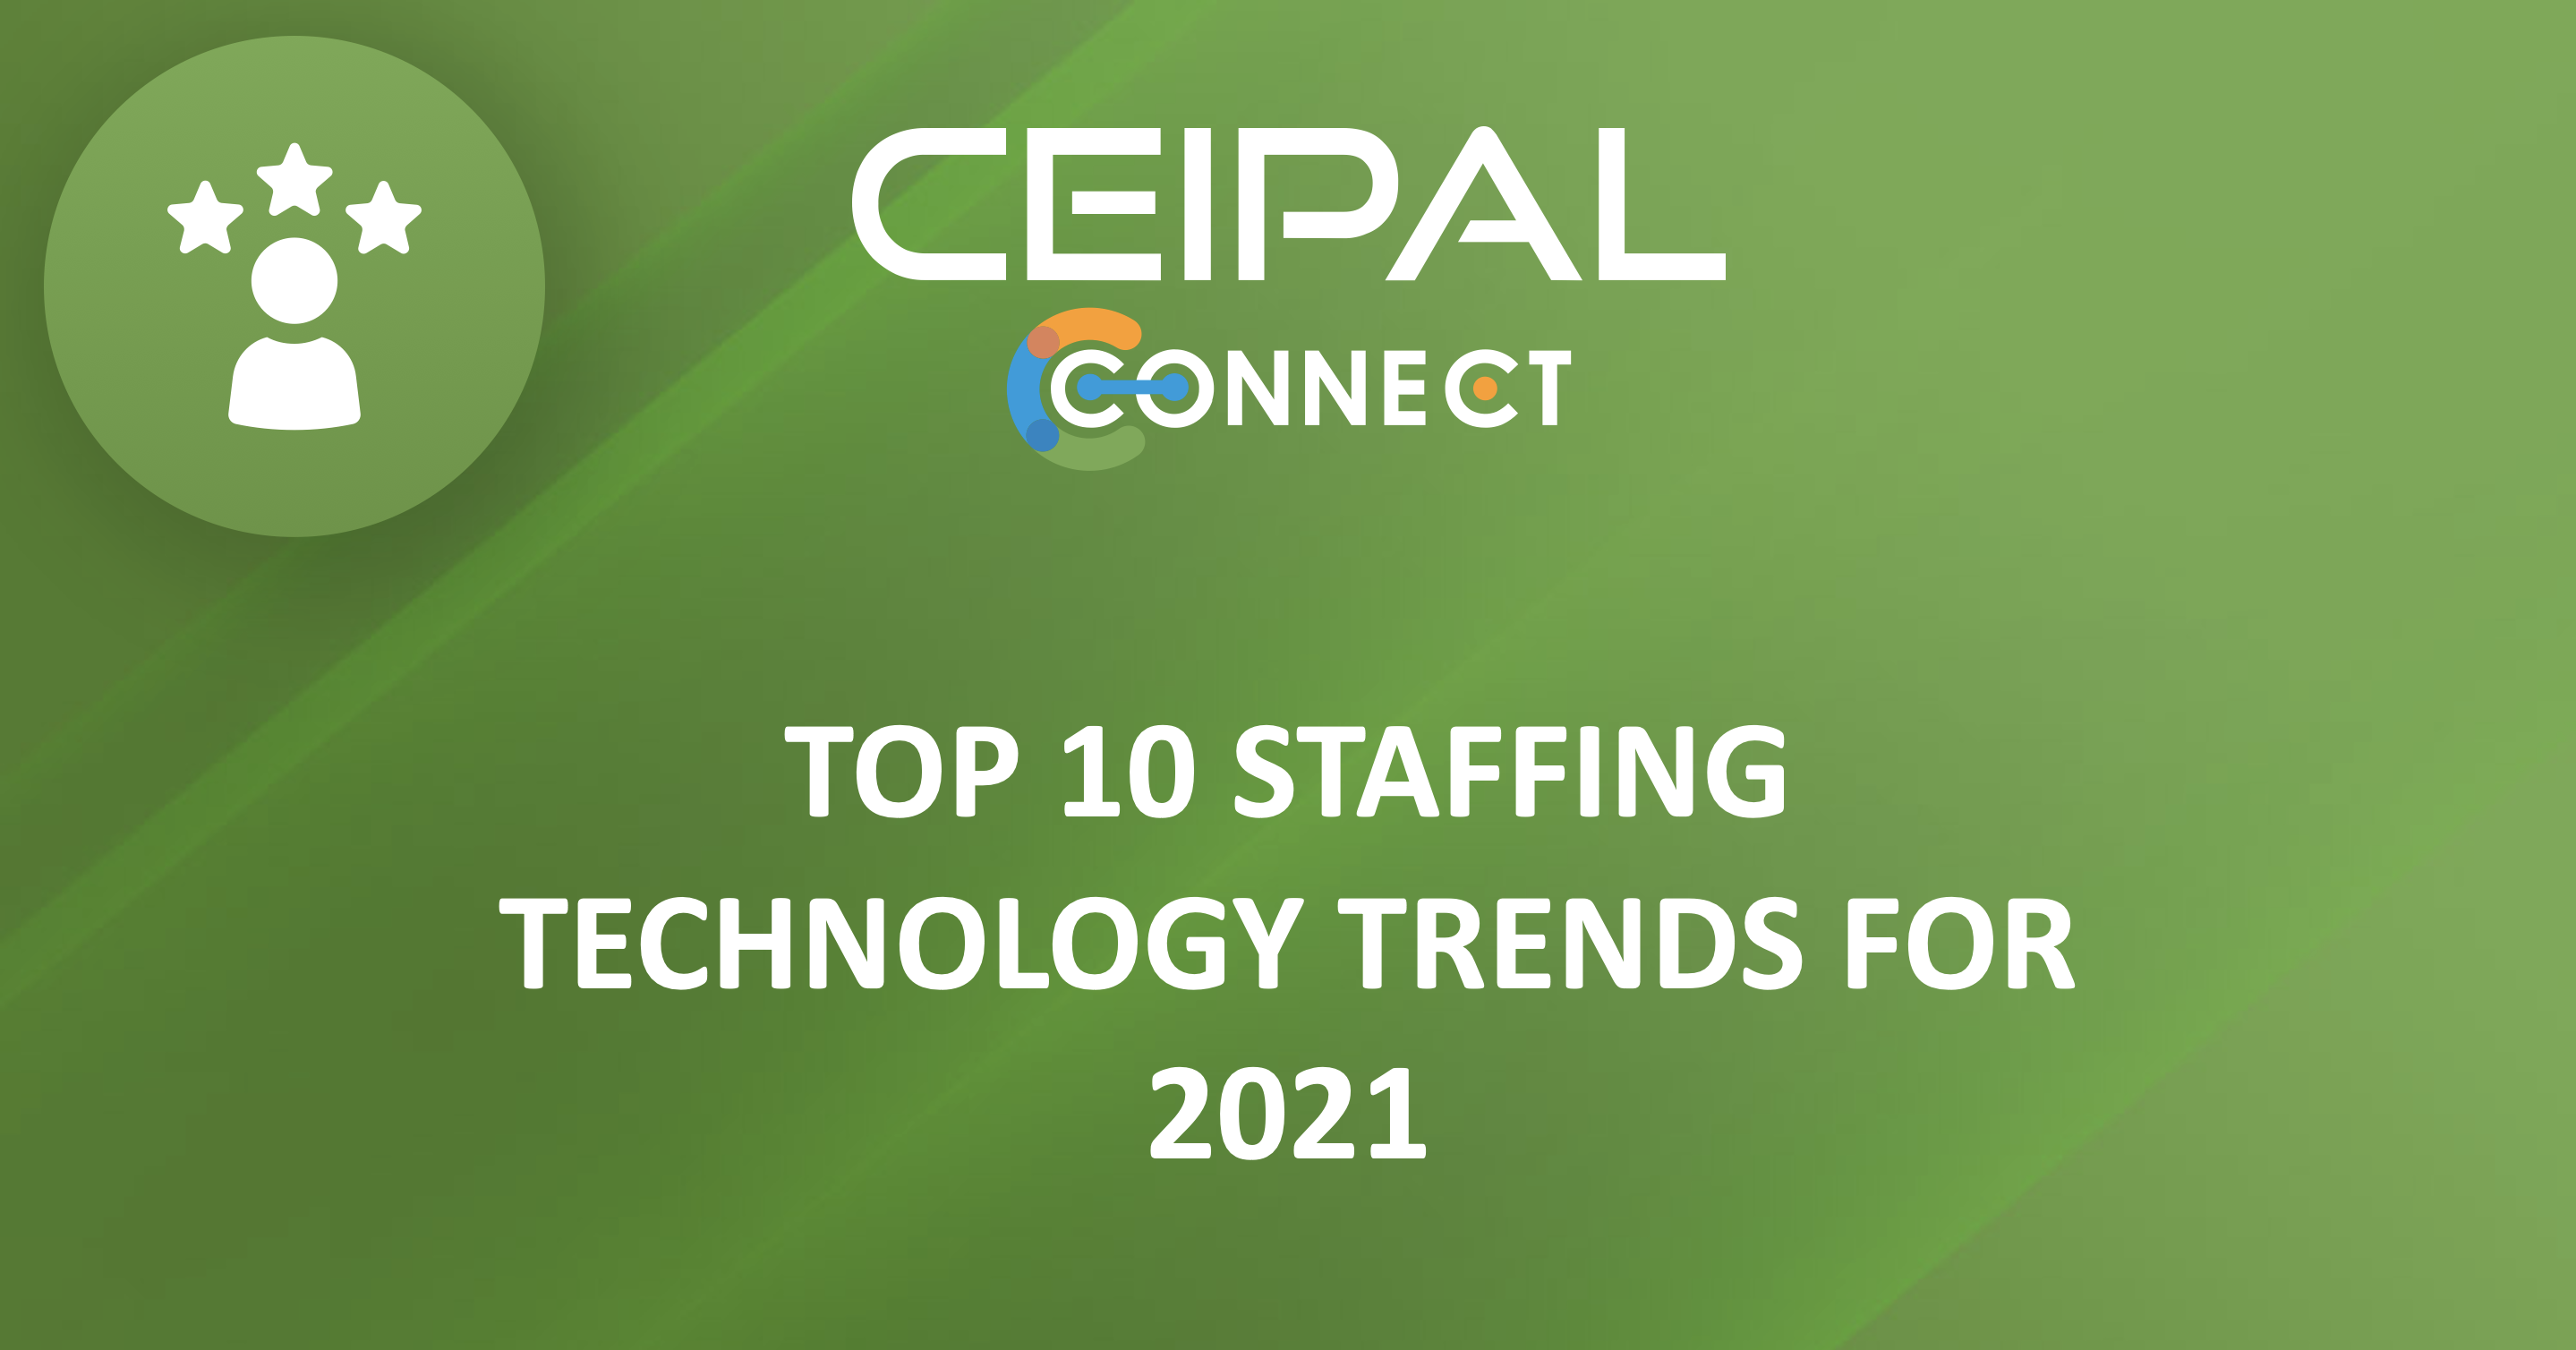 Top 10 Staffing Technology Trends for 2021